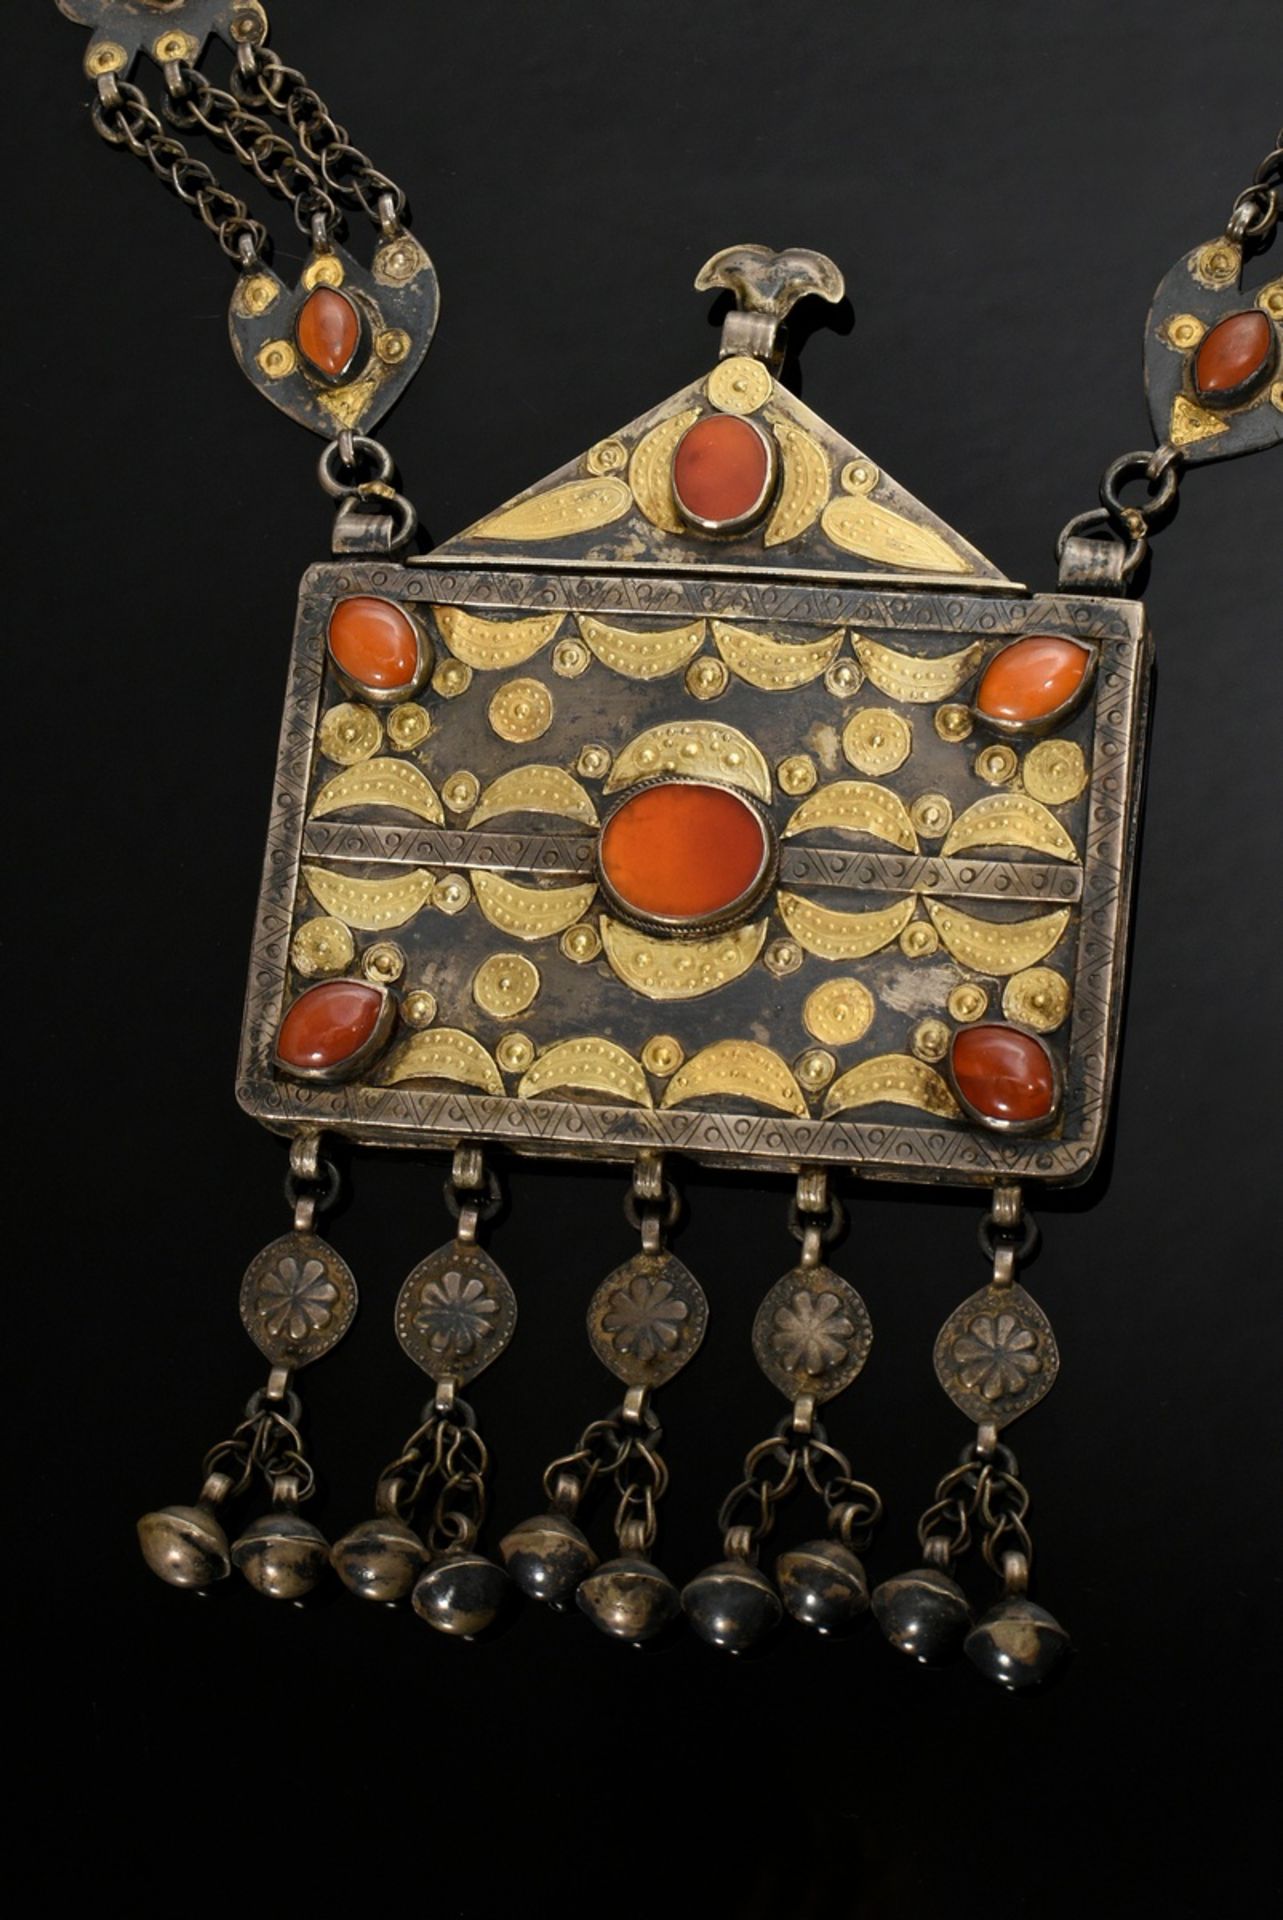 Yomud Turkmen necklace with openable amulet container "Kümsch Doga", chased crescent and sun-shaped